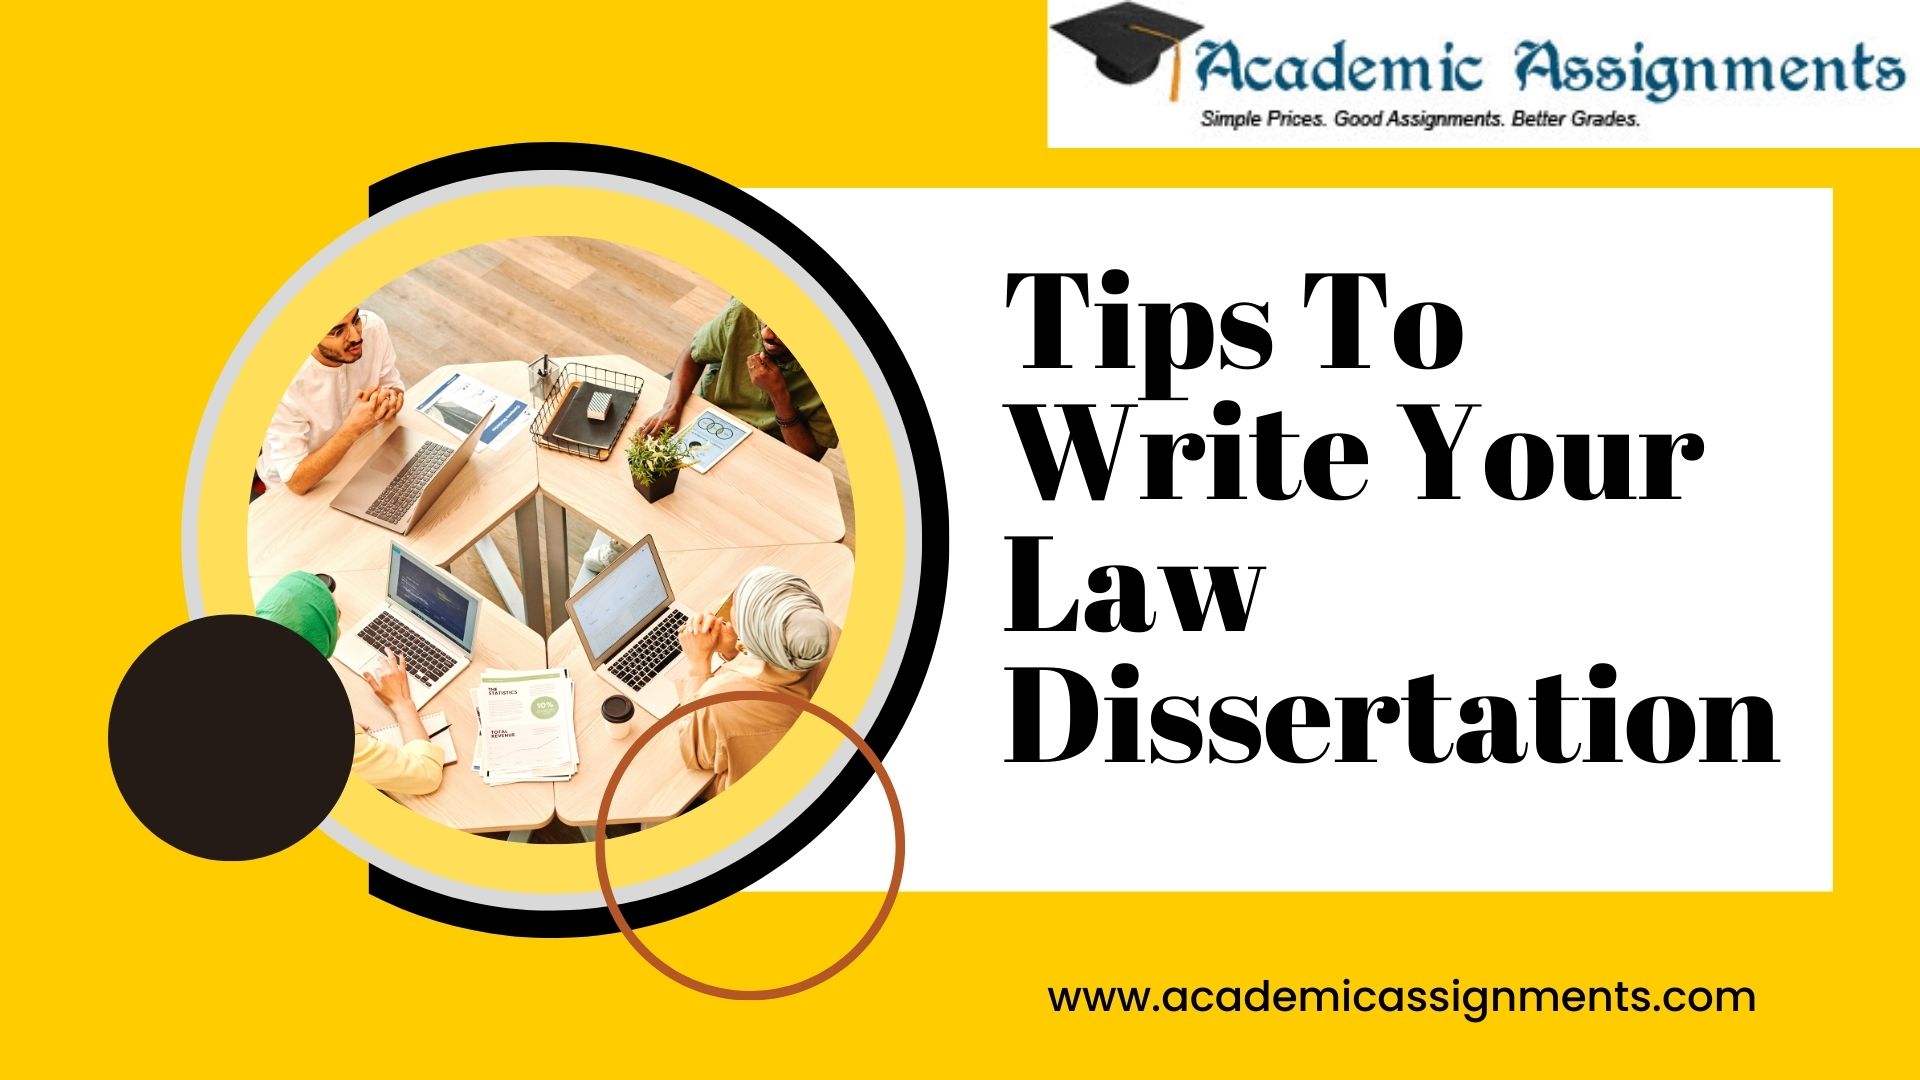 Tips To Write Your Law Dissertation